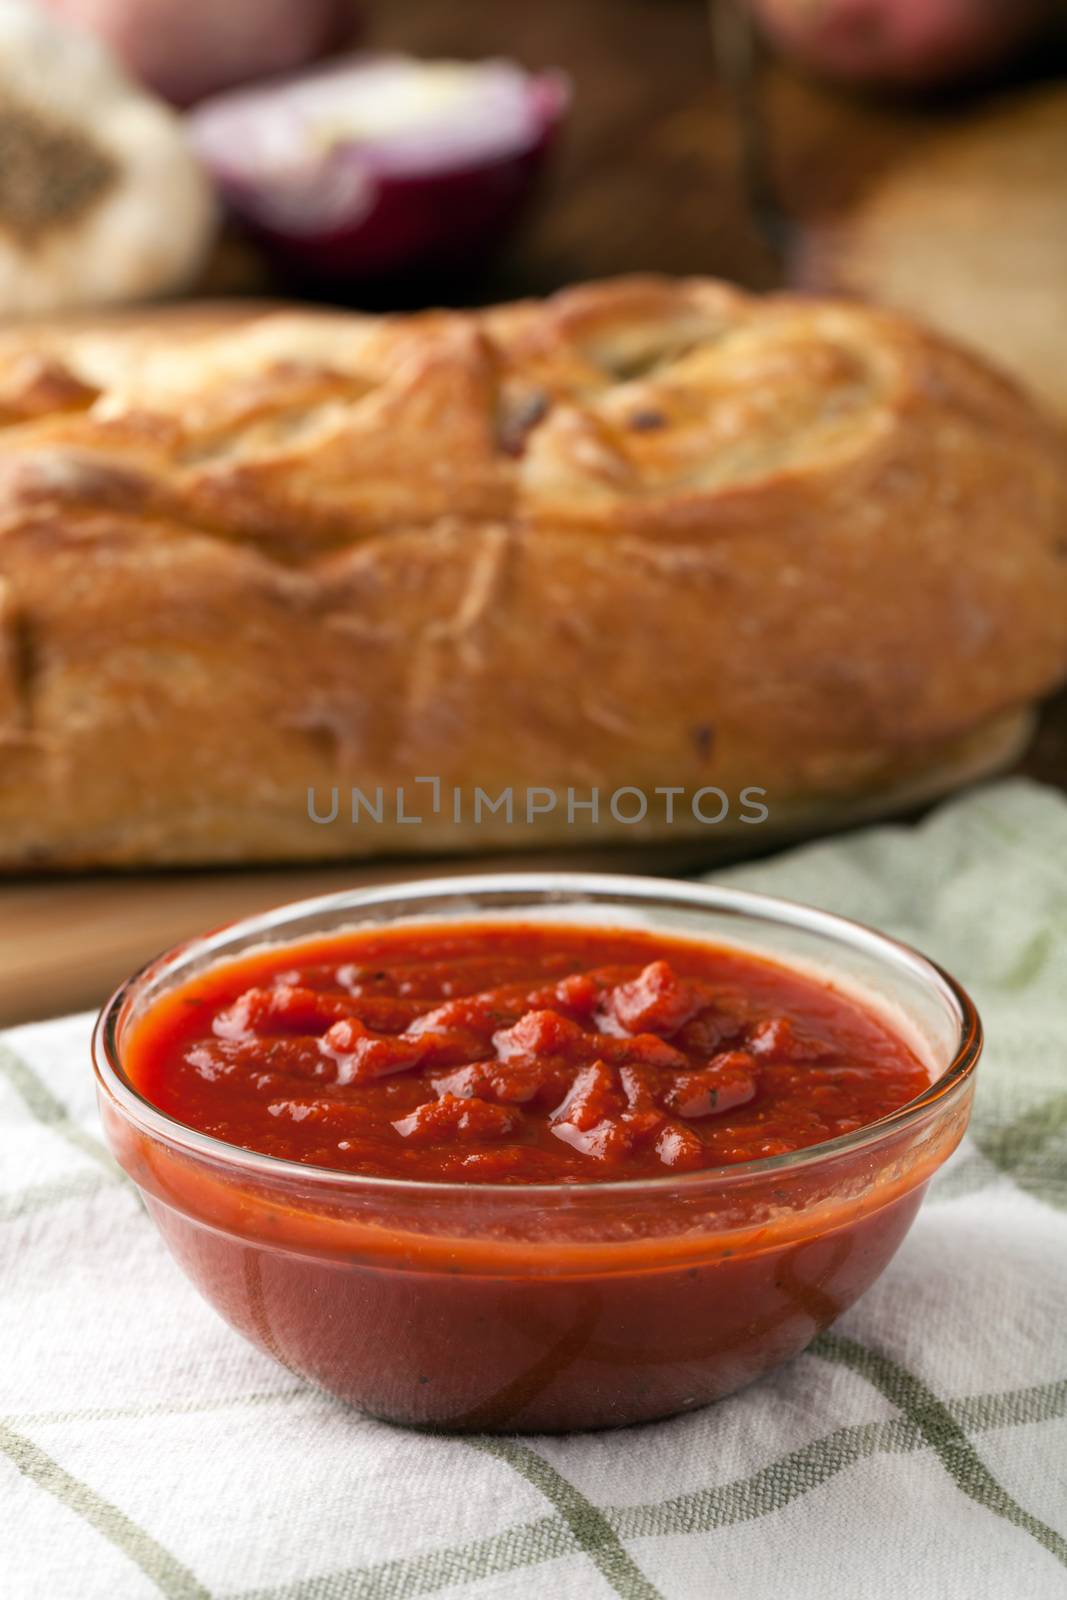 Freshly prepared pasta or pizza sauce marinara in a glass bowl. Bread in background.